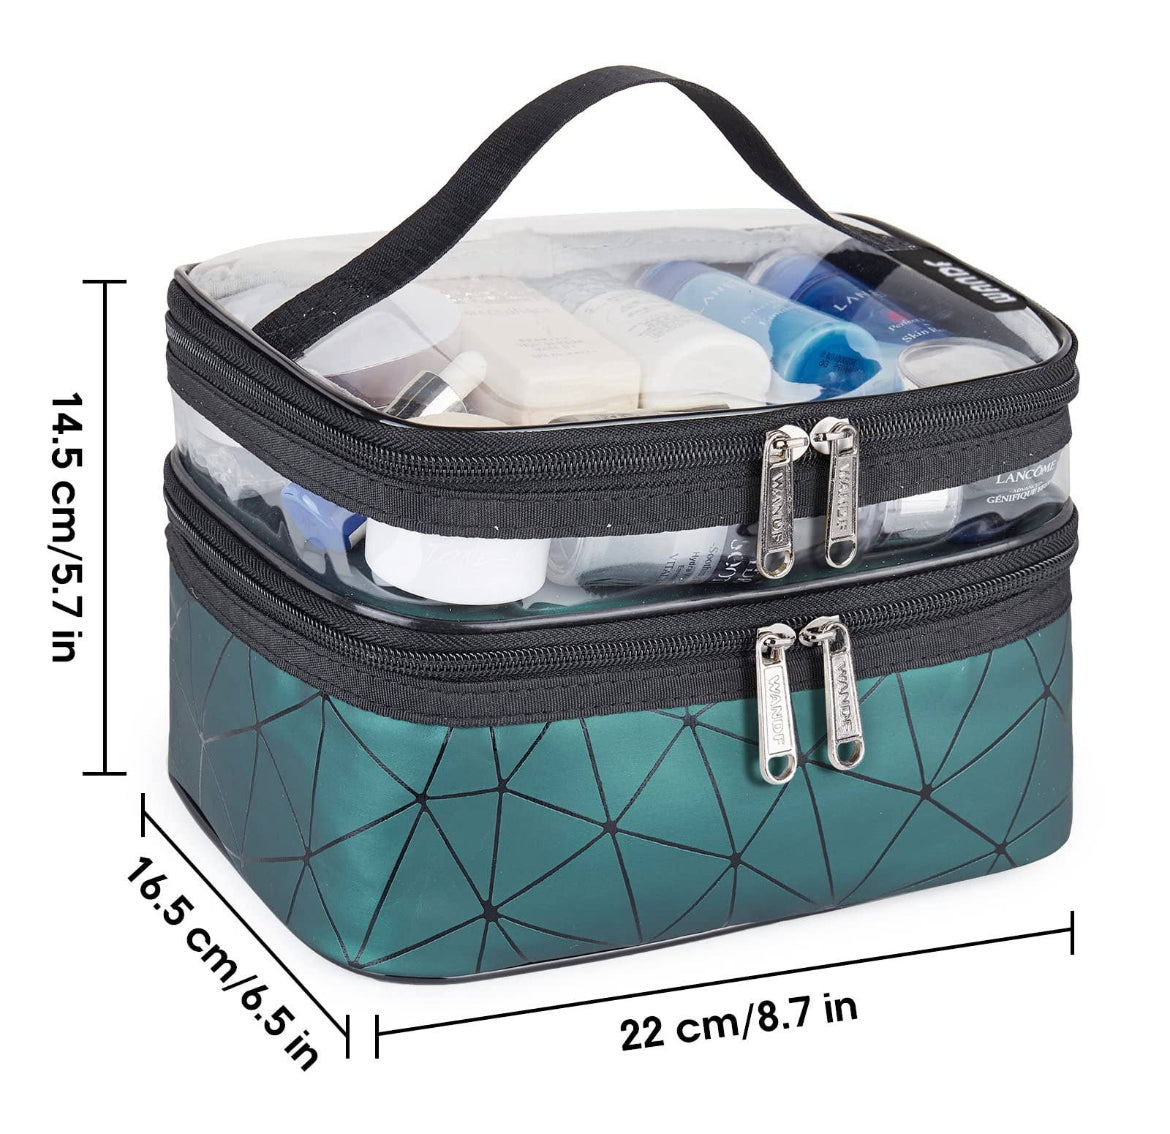 Double Layer Travel Makeup/Toiletry Bag